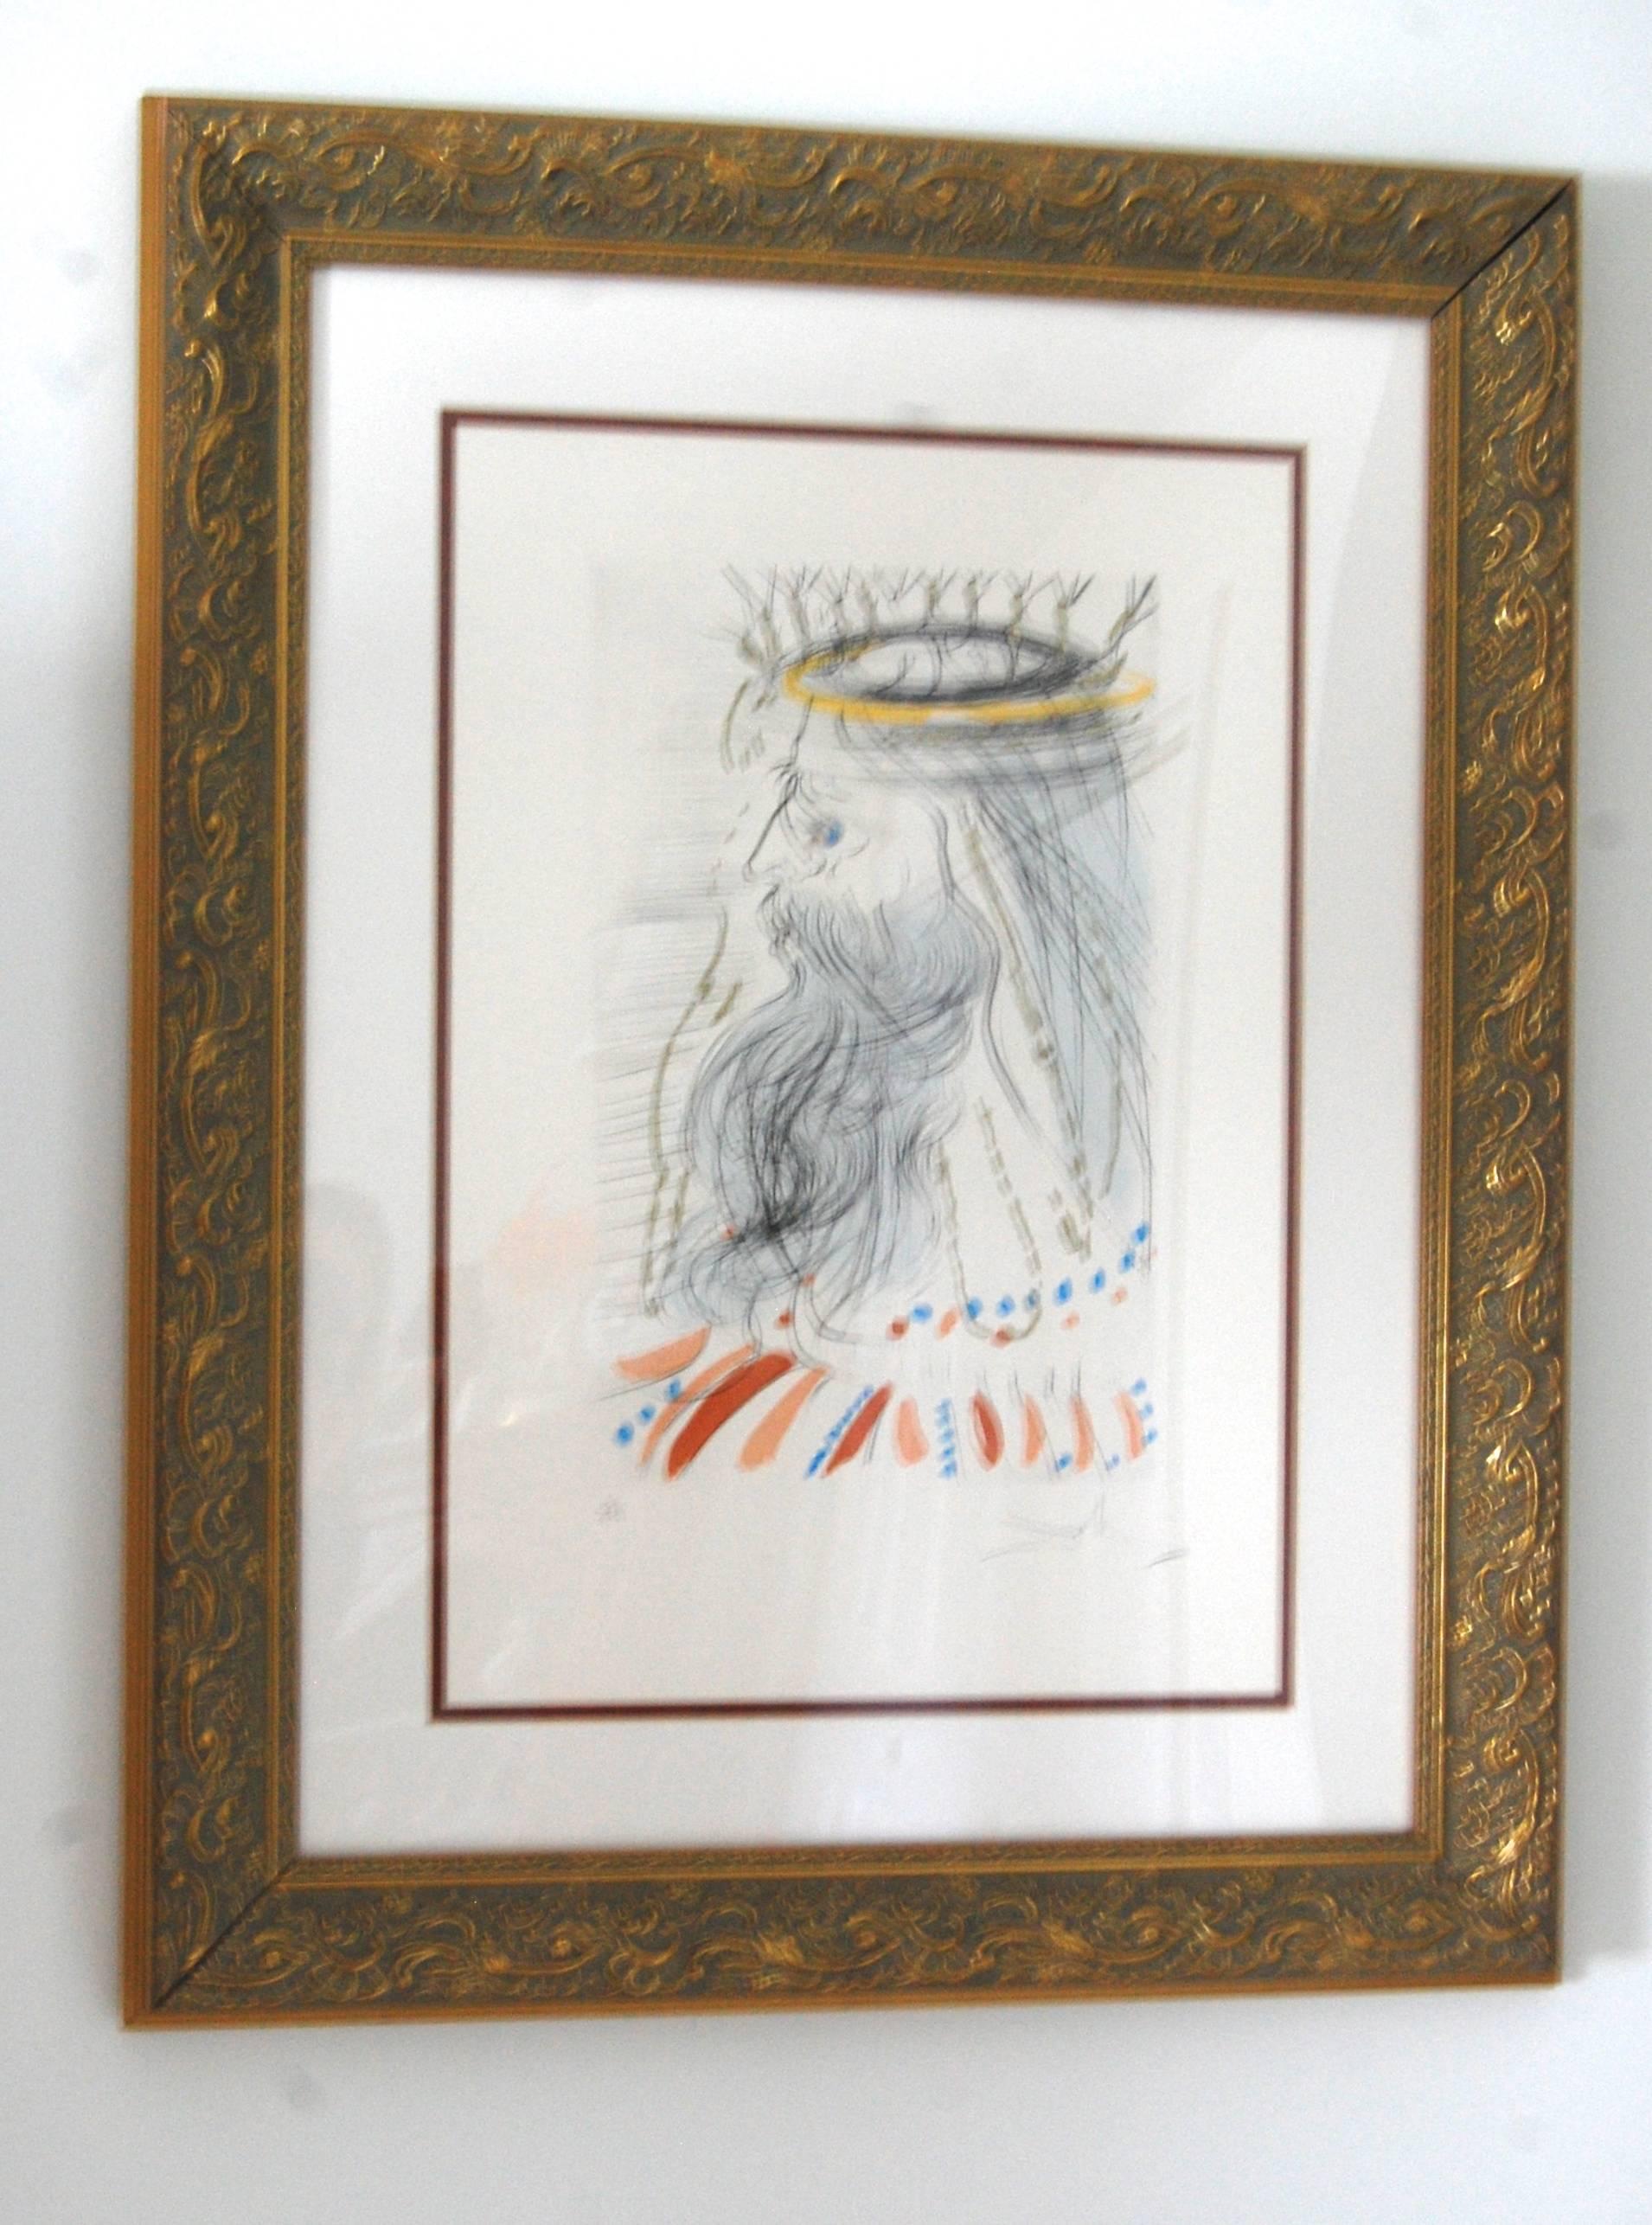  Song of Song of King Solomon Etching with Gold Dust - Surrealist Print by Salvador Dalí